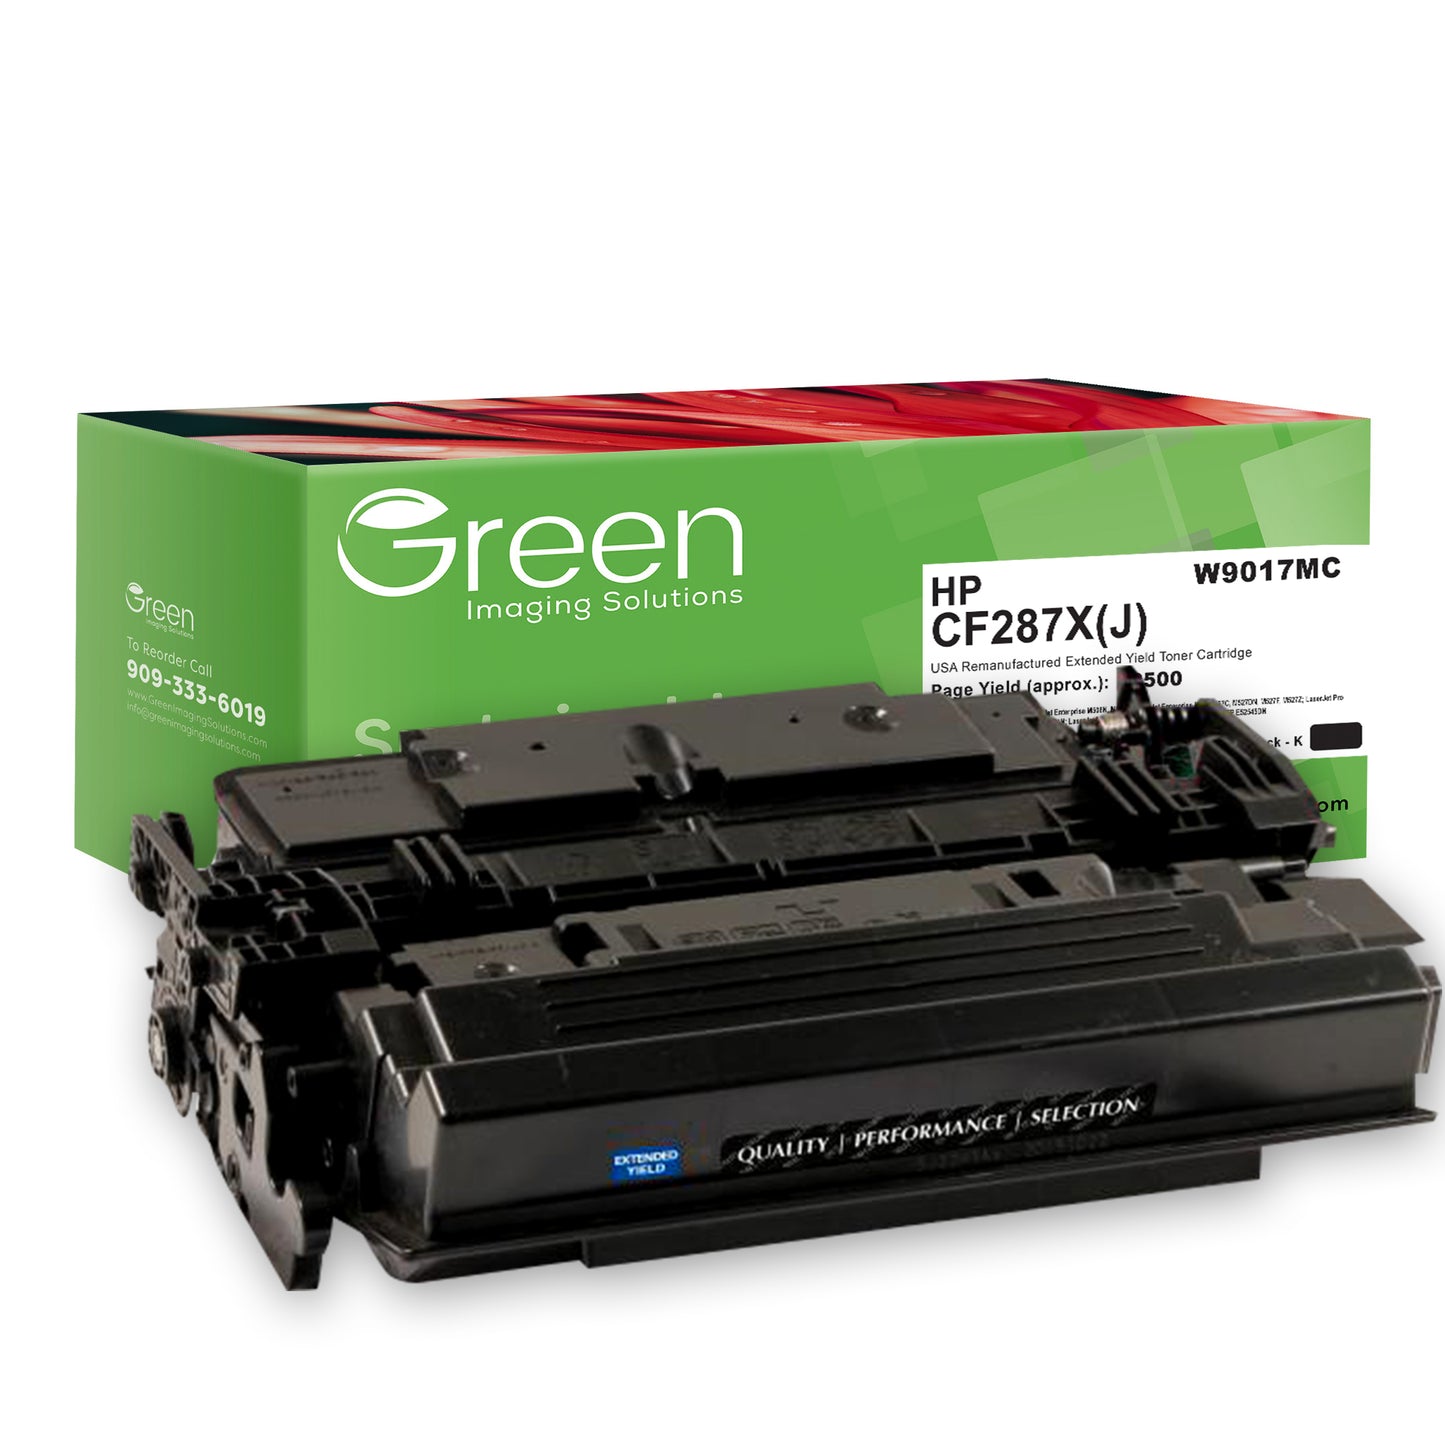 GIS USA Remanufactured Extended Yield Toner Cartridge for HP CF287X